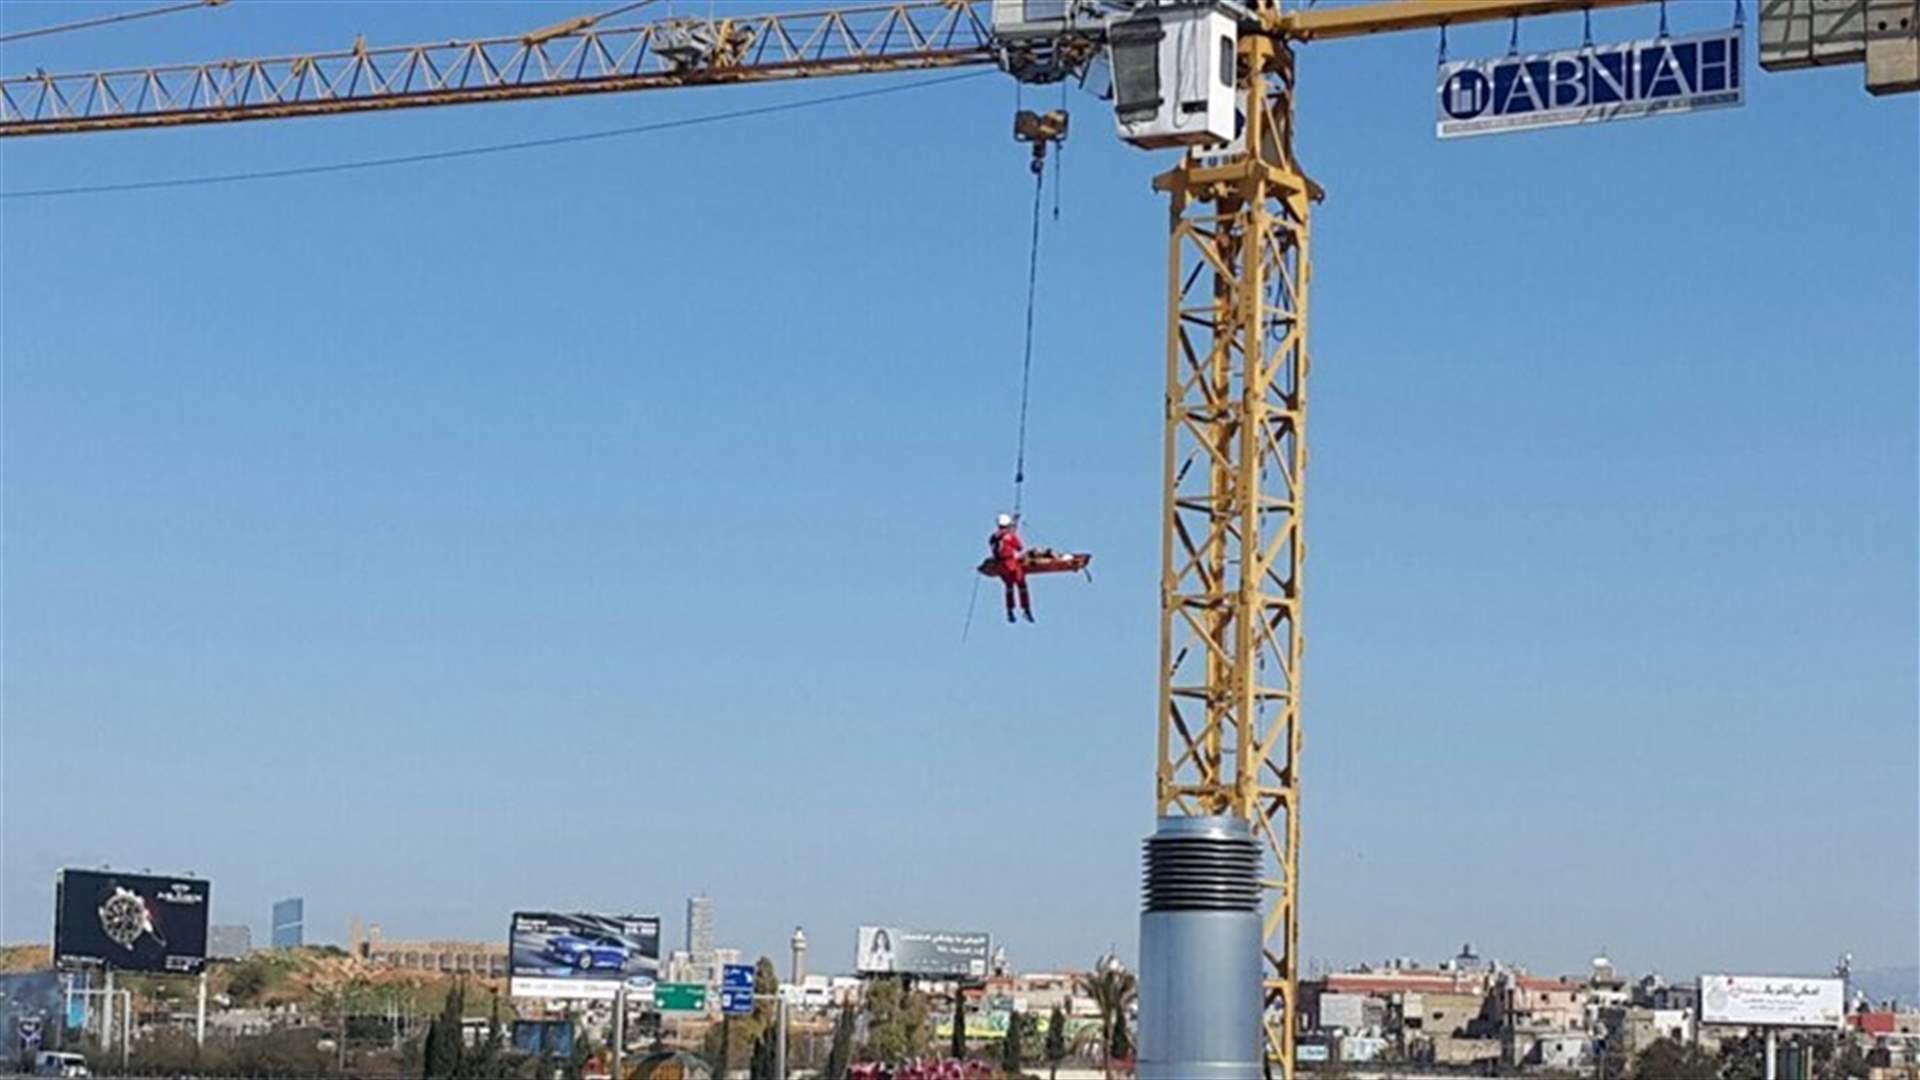 [PHOTO] Worker injured in a building site accident in Beirut